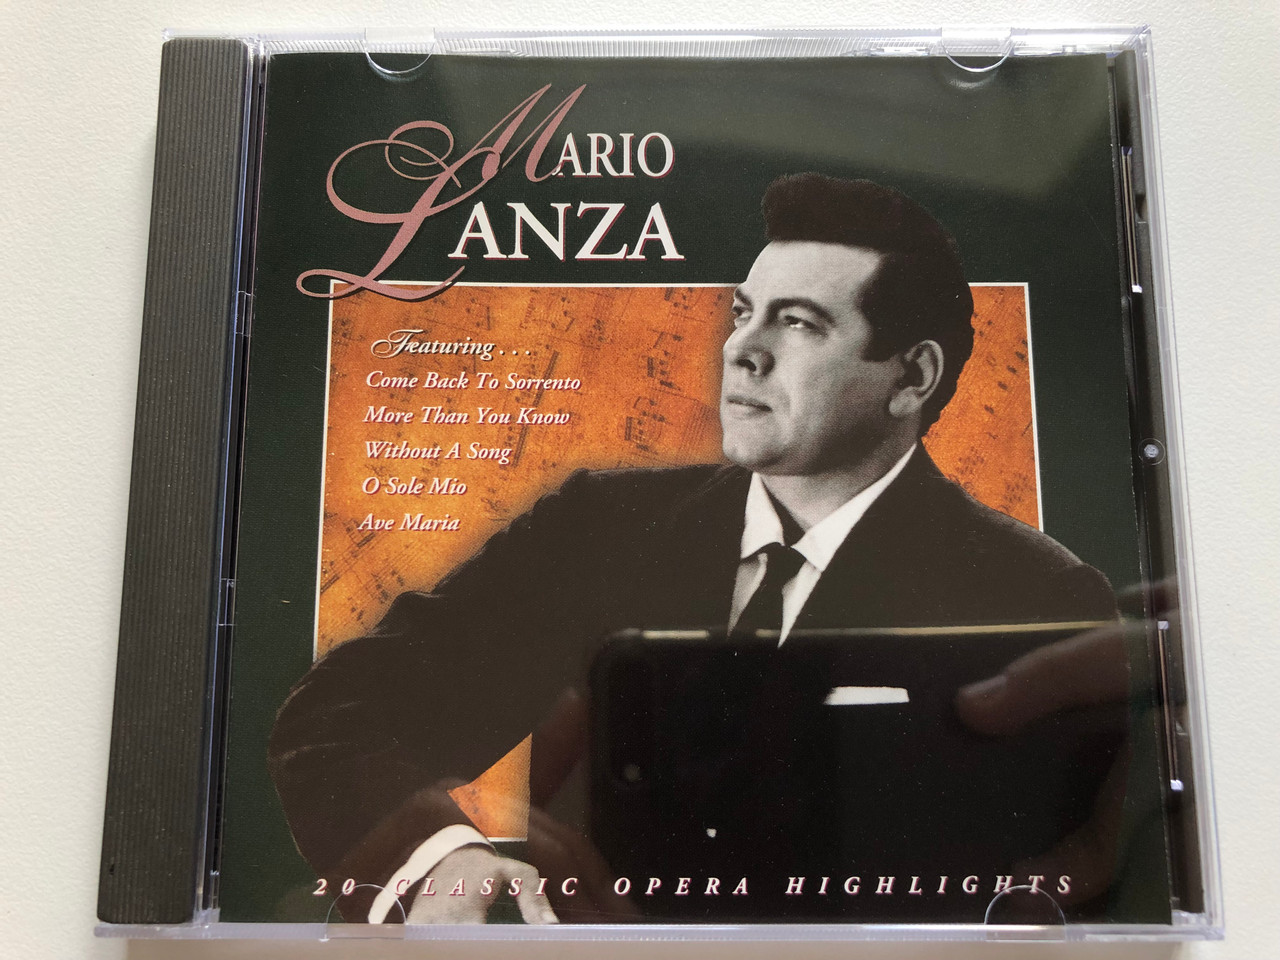 https://cdn10.bigcommerce.com/s-62bdpkt7pb/products/0/images/210700/Mario_Lanza_20_Classic_Opera_Highlights_Featuring..._Come_Back_To_Sorrento_More_Than_You_Know_Without_A_Song_O_Sole_Mio_Ave_Maria_Hey_Presto_Audio_CD_1996_KBCD_034_1__18496.1643693694.1280.1280.JPG?c=2&_gl=1*5zxei5*_ga*MjA2NTIxMjE2MC4xNTkwNTEyNTMy*_ga_WS2VZYPC6G*MTY0MzY5MjIzNi4yODEuMS4xNjQzNjkzNDc3LjE3